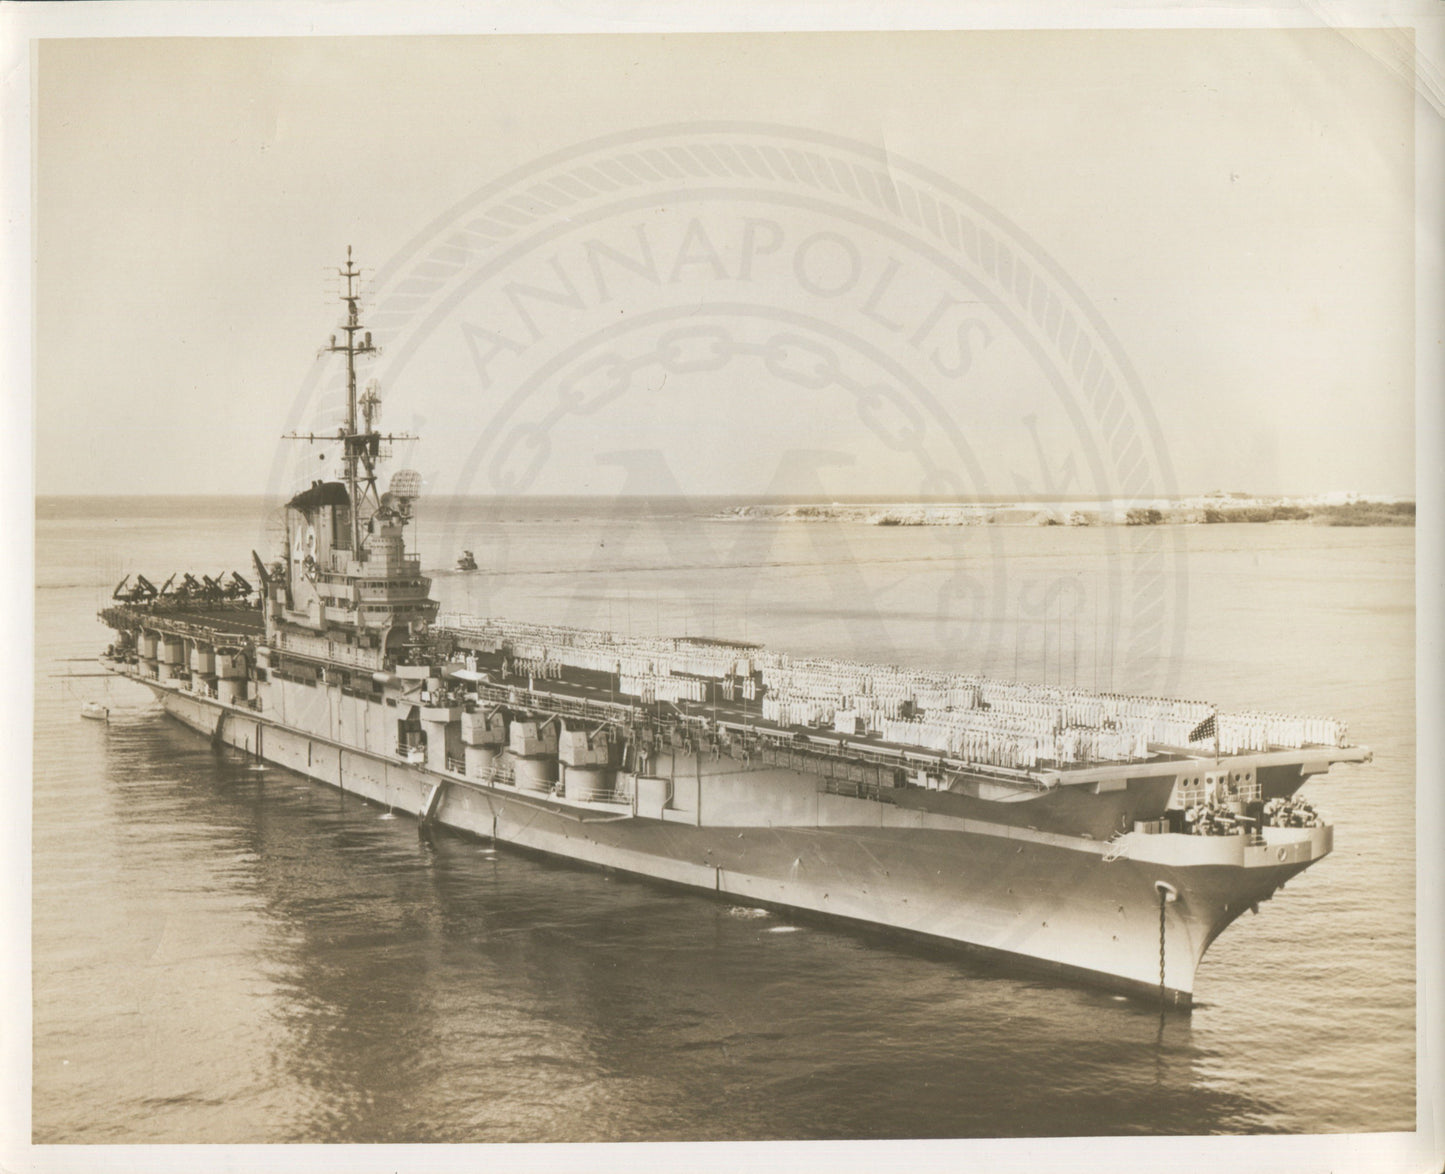 Official Navy Photo of WWII era USS Coral Sea (CV-43) Aircraft Carrier